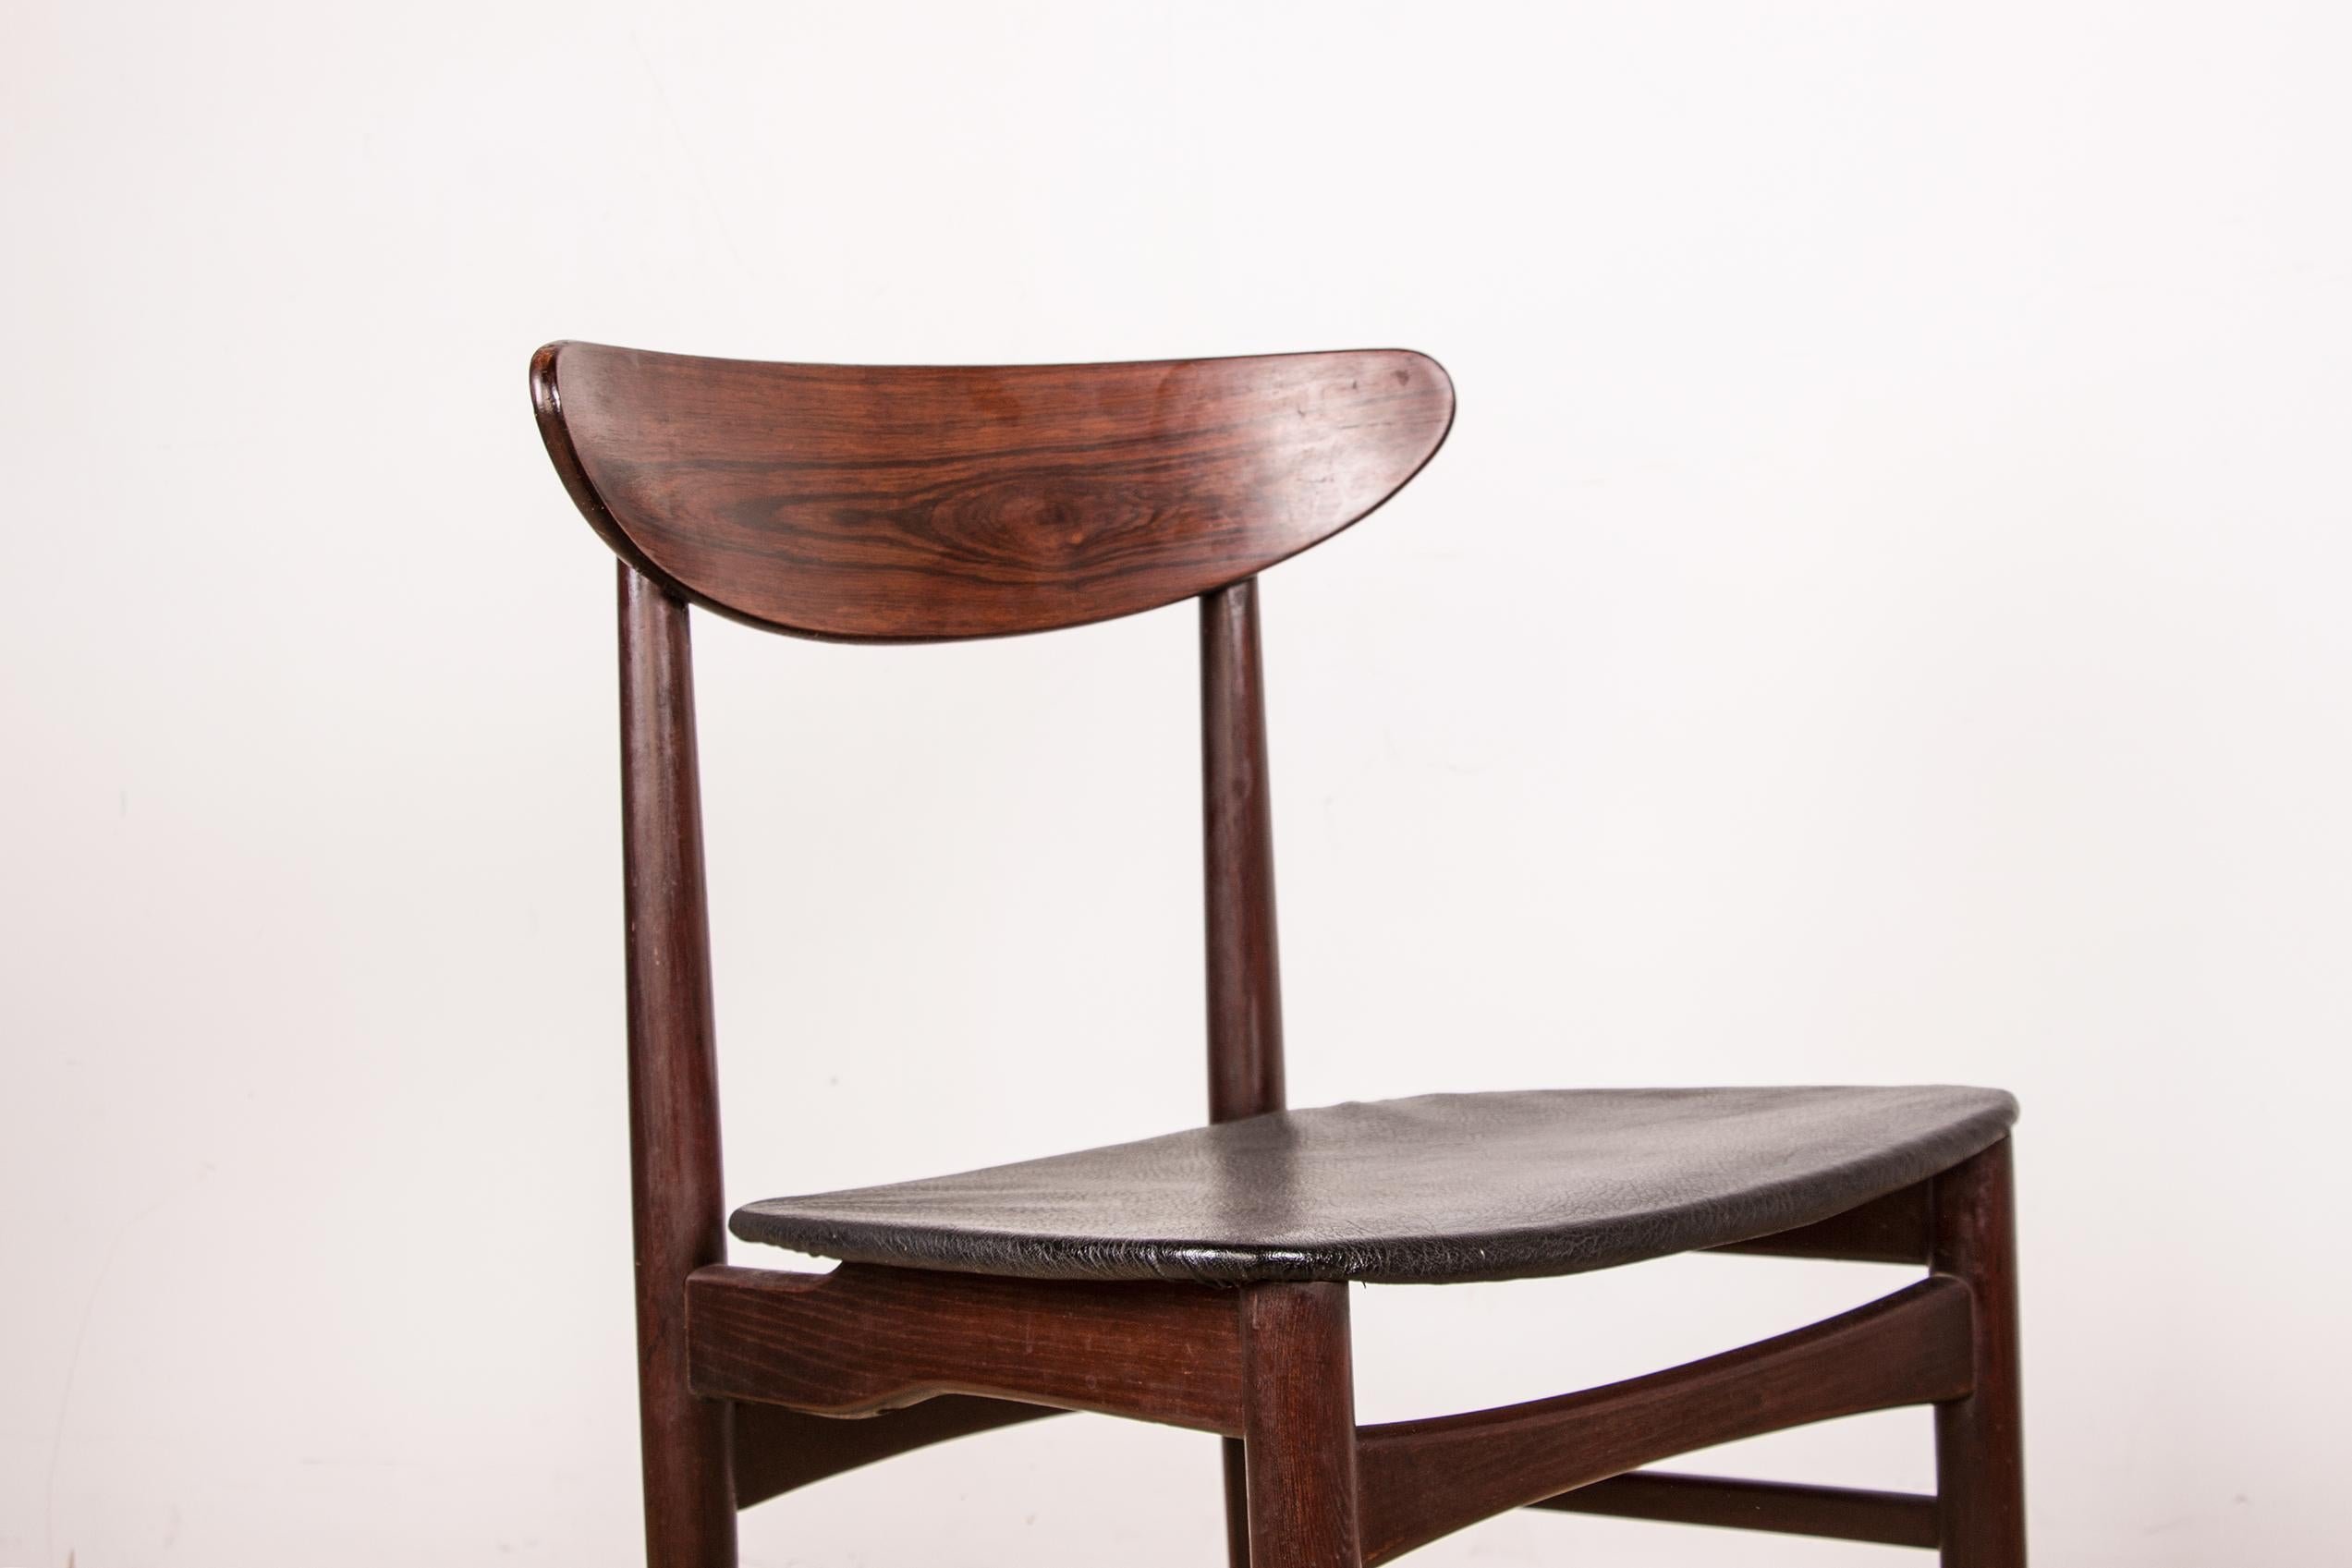 Mid-20th Century Series of 6 Danish Chairs in Rosewood and Skai by Dyrlund, 1960